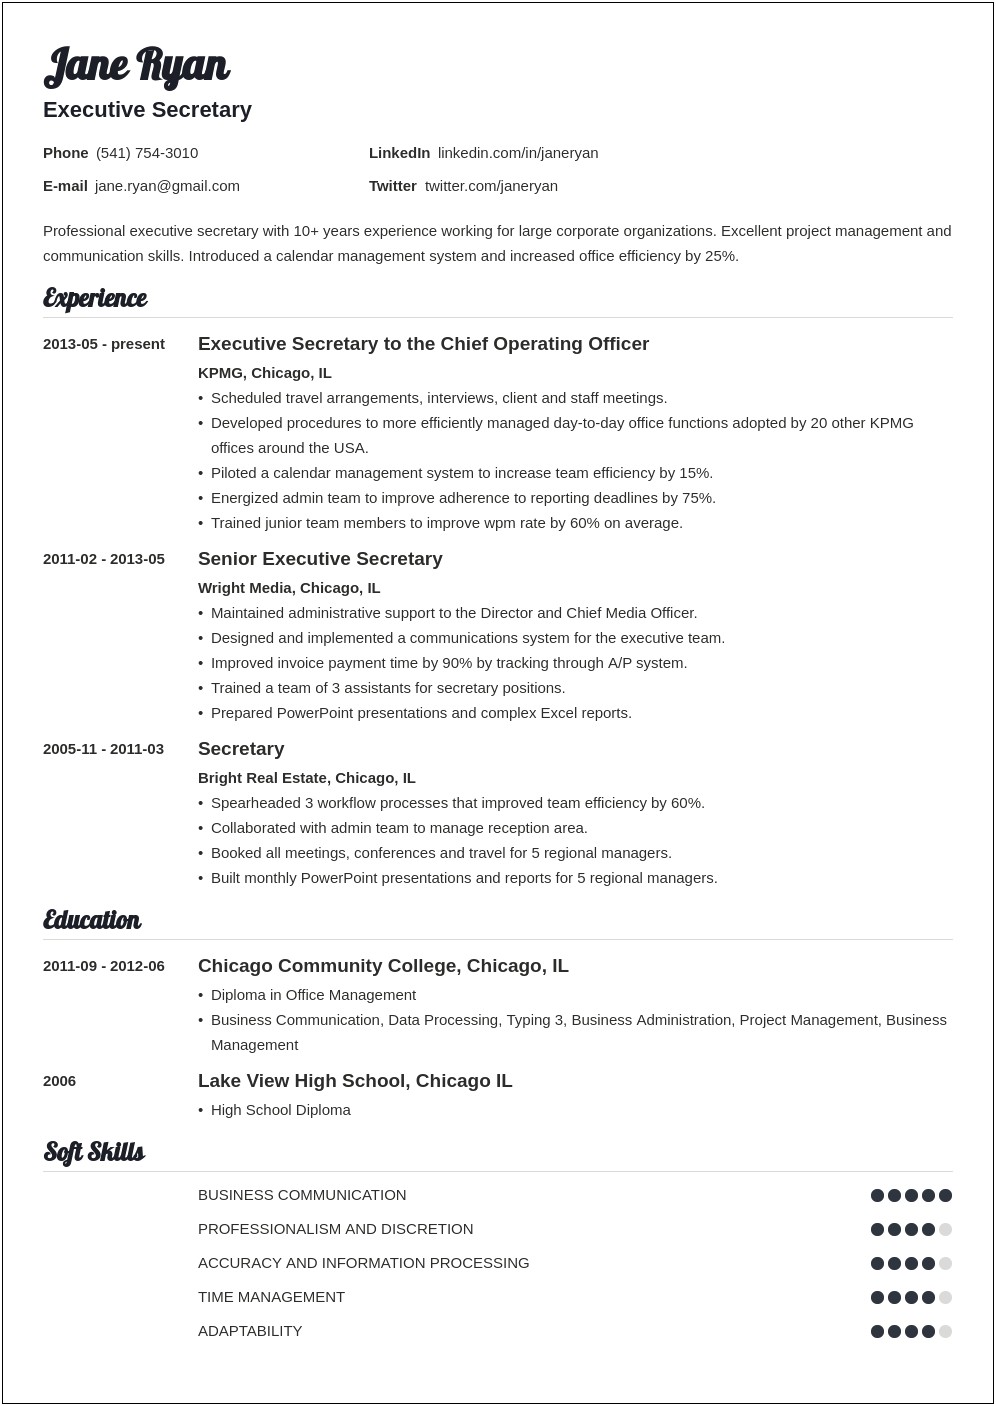 Resume Objective For A Secretary Position